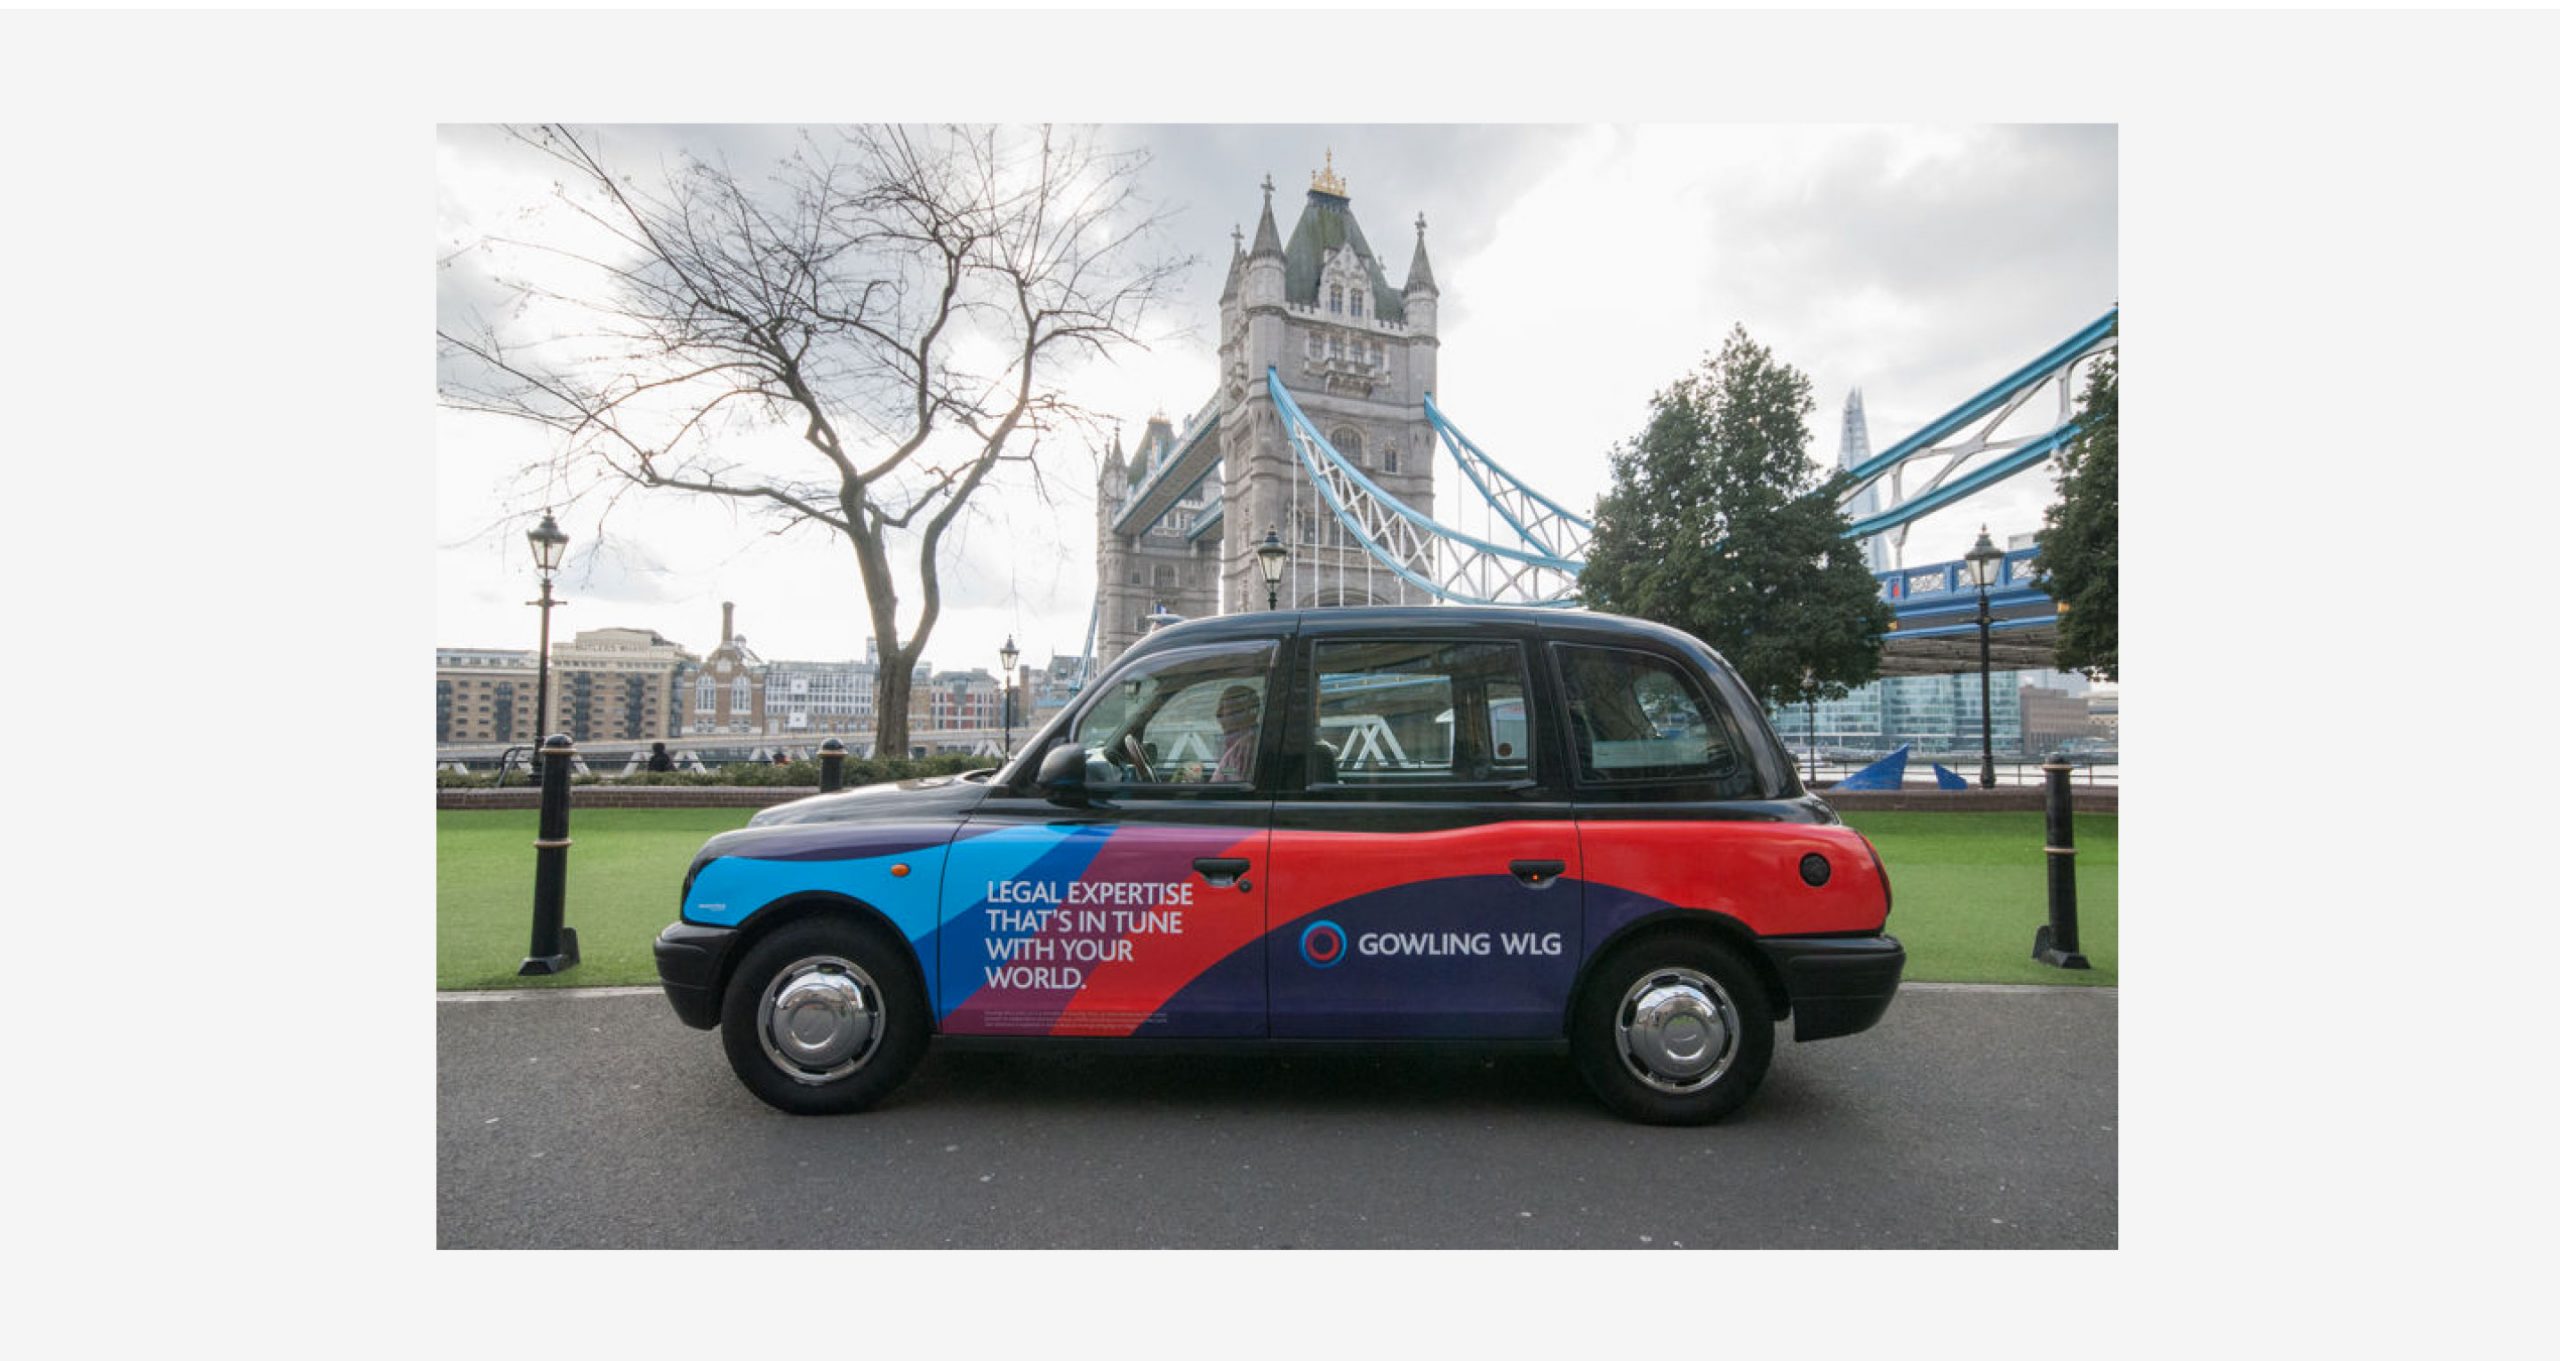 A colourful wrap with the new Gowling WLG logo is displayed on a London taxi cab